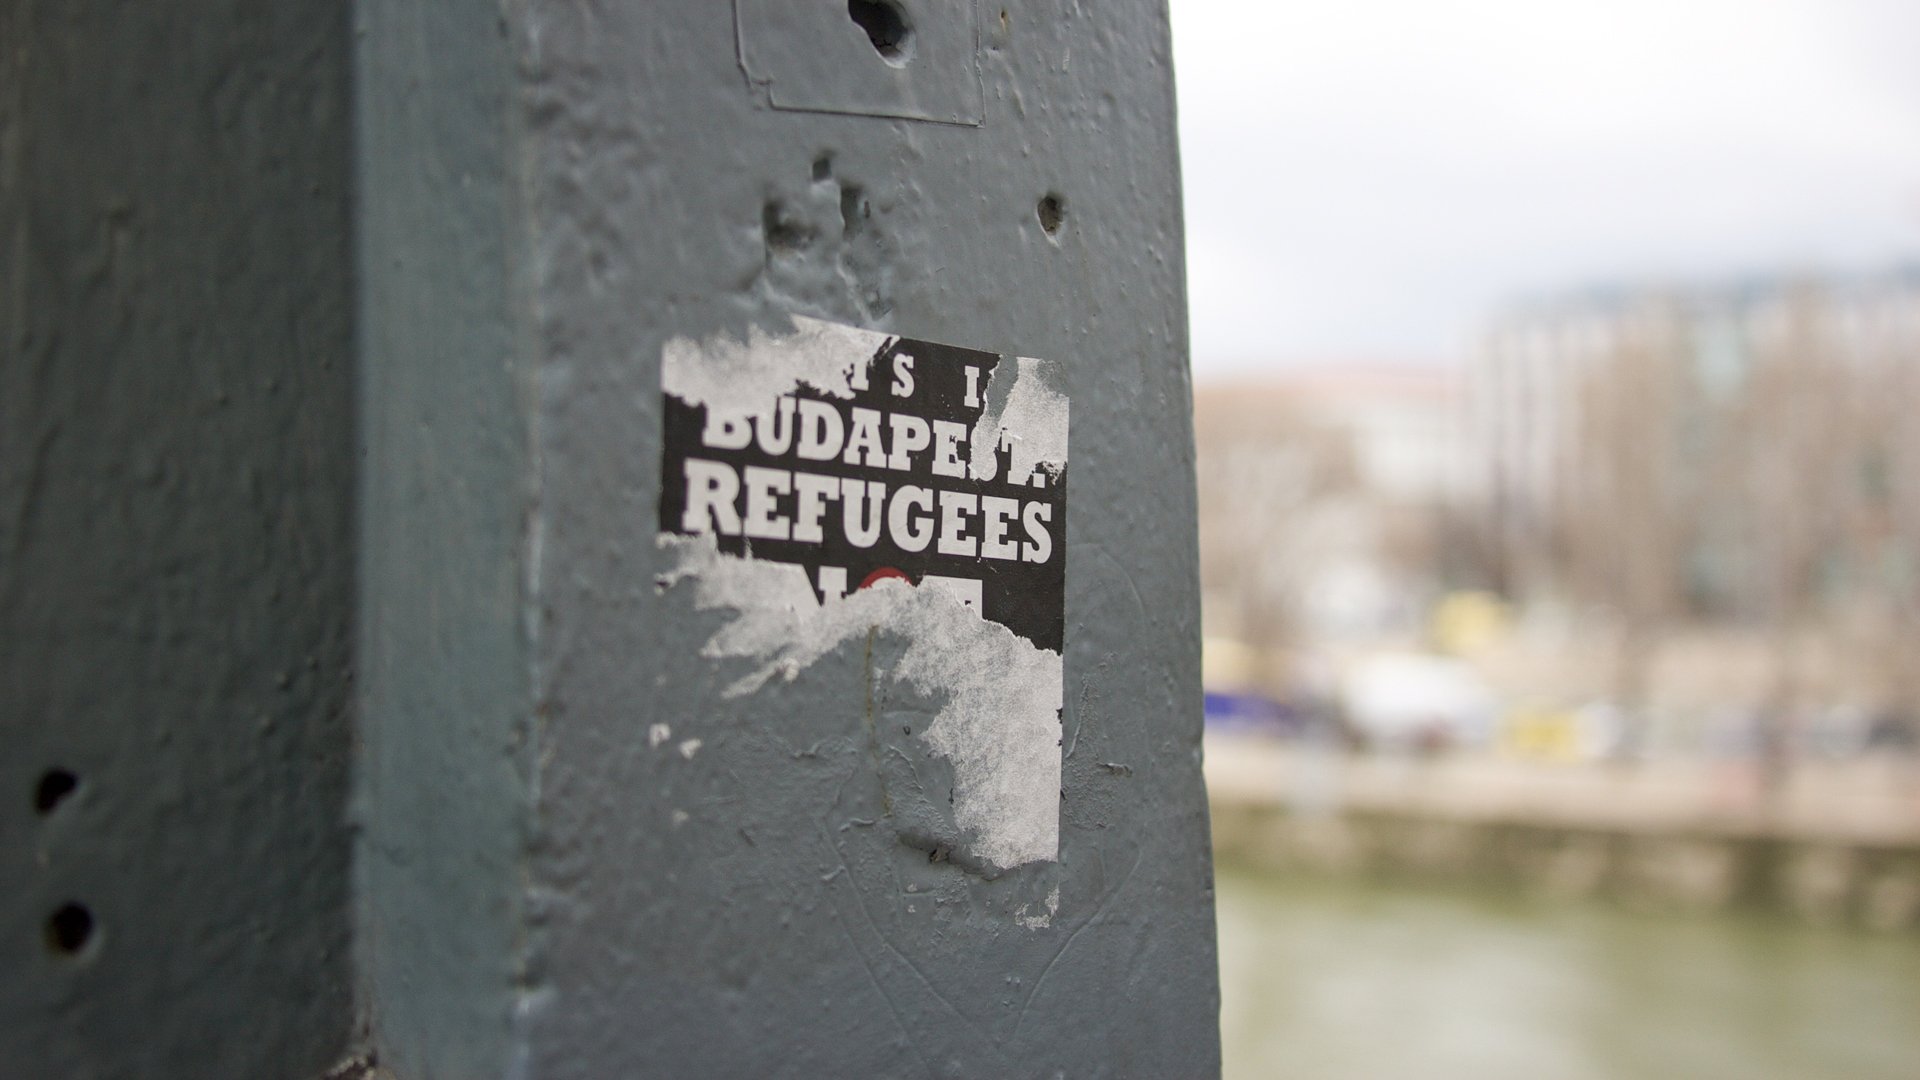 The refugee crisis has created more tension politically within Hungary and in the European Union. (Photo by Rian Bosse)